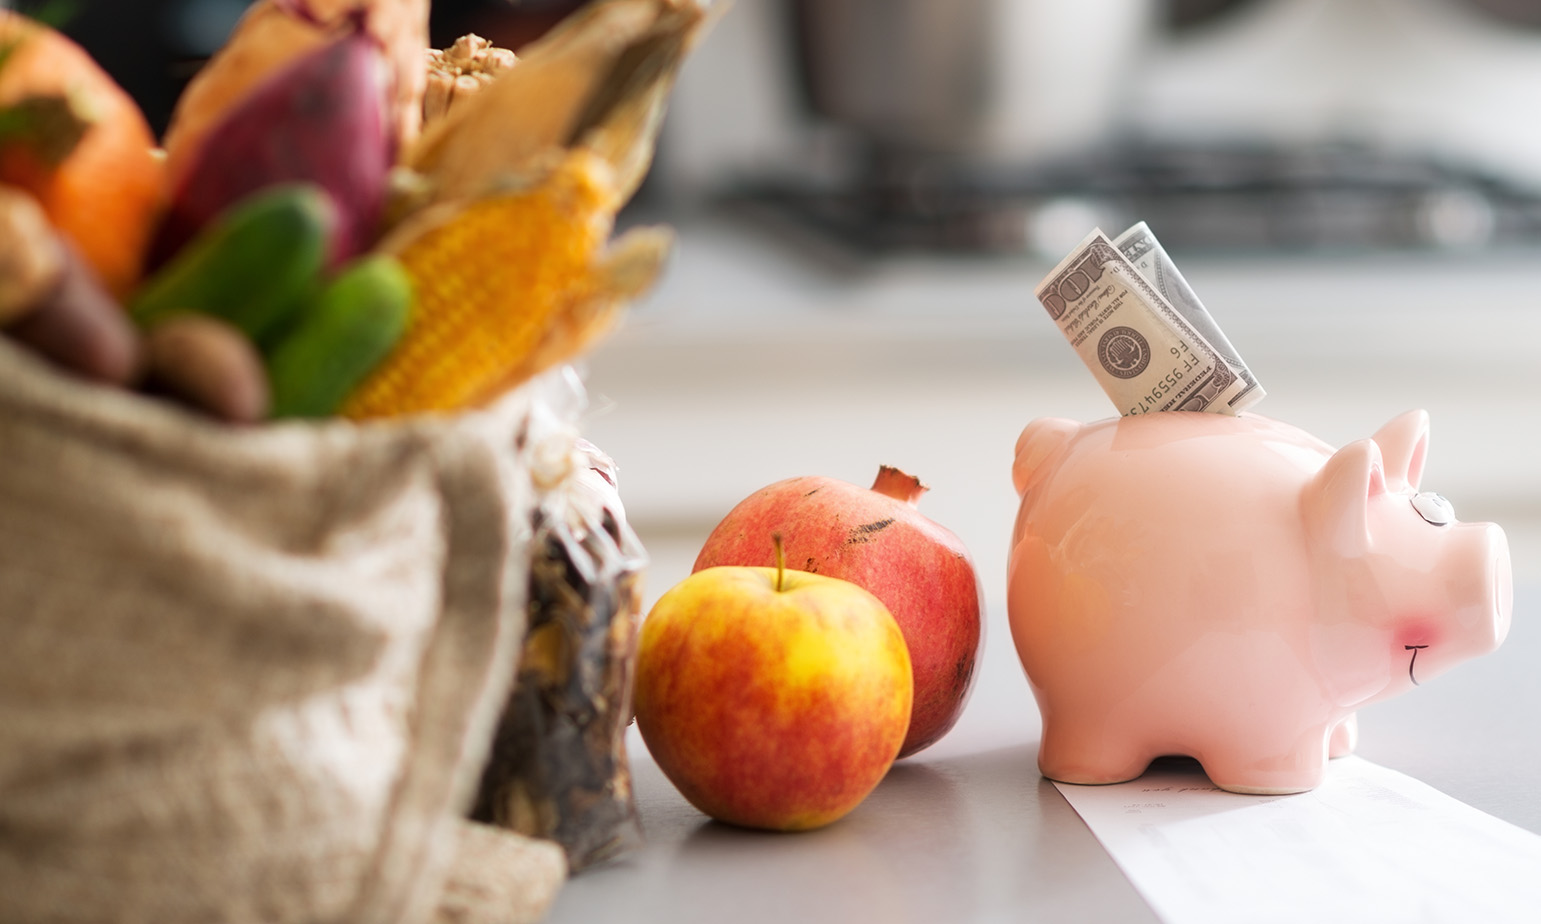 Piggy bank with folded cash bill nestled in slot, in front of bagged produce, pomegranate, and apple, frugal budget food shopping